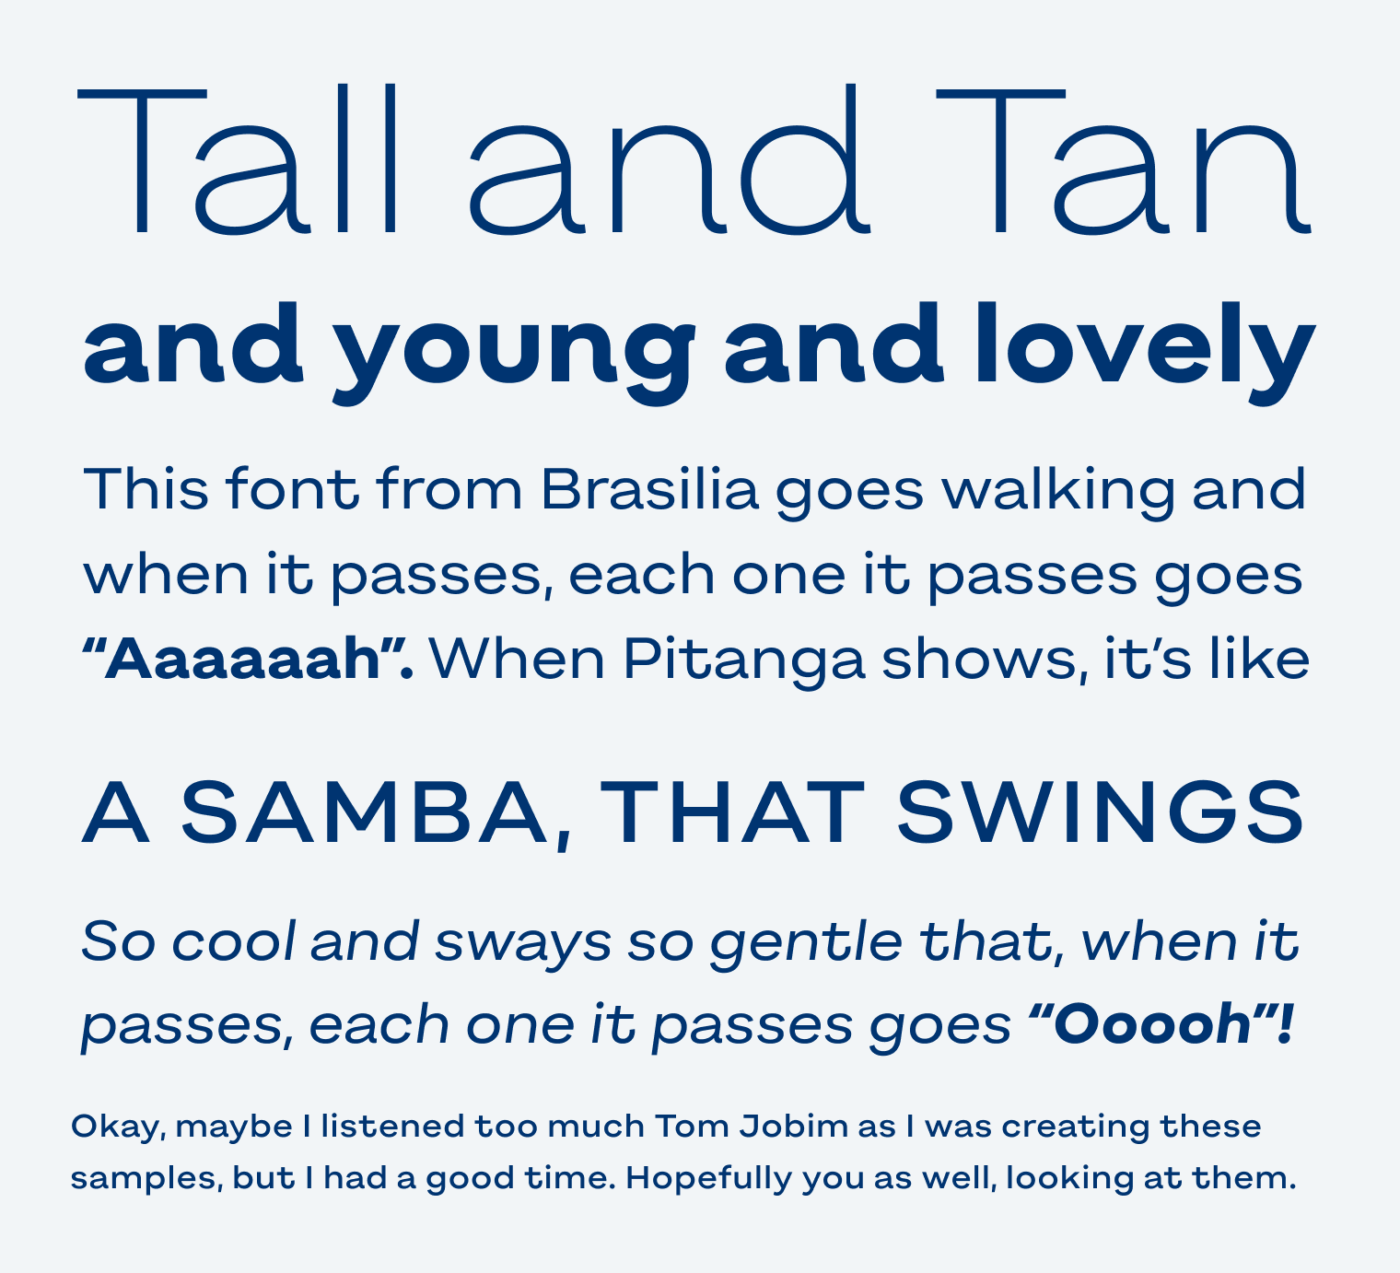 Tall and Tan and young and lovely. This font from Brasília goes walking and when it passes, each one it passes goes “Aaaaaah”. When Pitanga shows, it’s like a samba, that swings So cool and sways so gentle that, when it passes, each one it passes goes “Ooooh”! Okay, maybe I listened too much Tom Jobim as I was creating these samples, but I had a good time. Hopefully you as well, looking at them.